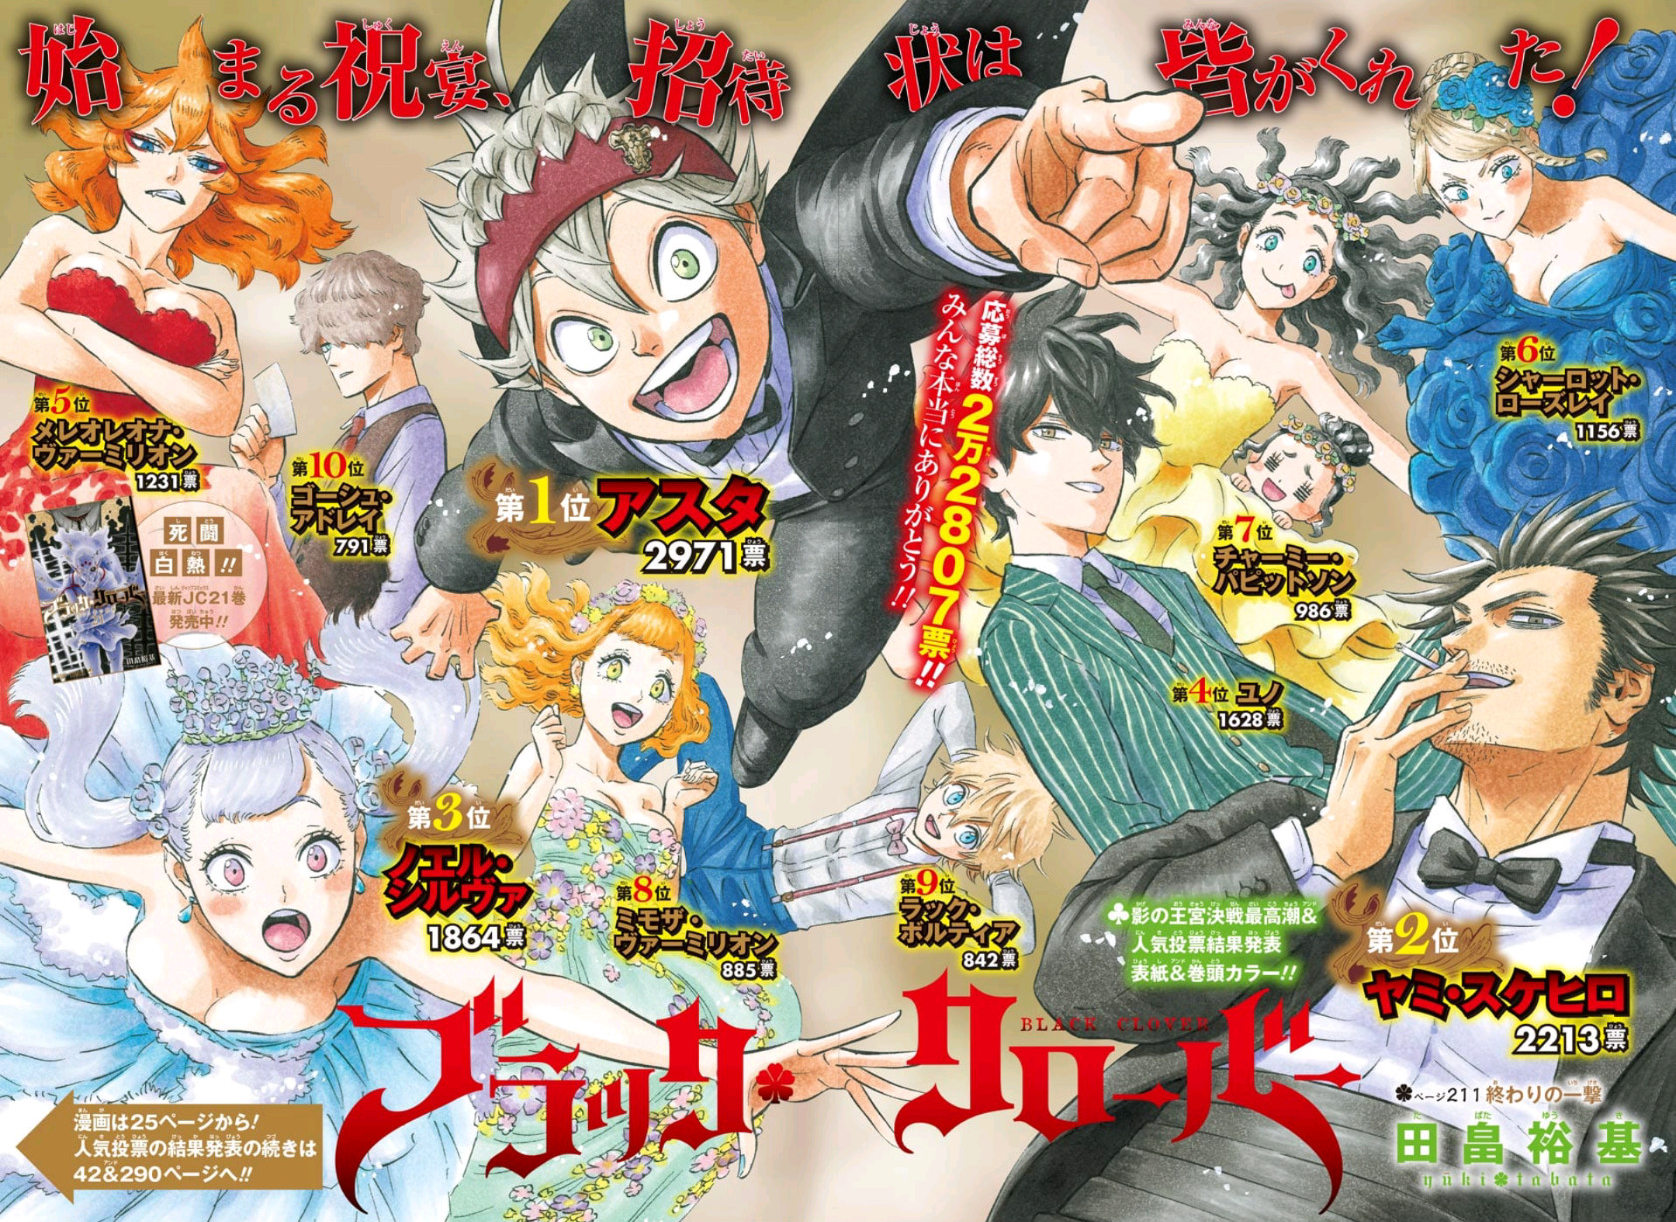 RANKING: Every Black Clover OP, As Voted On By The Fans